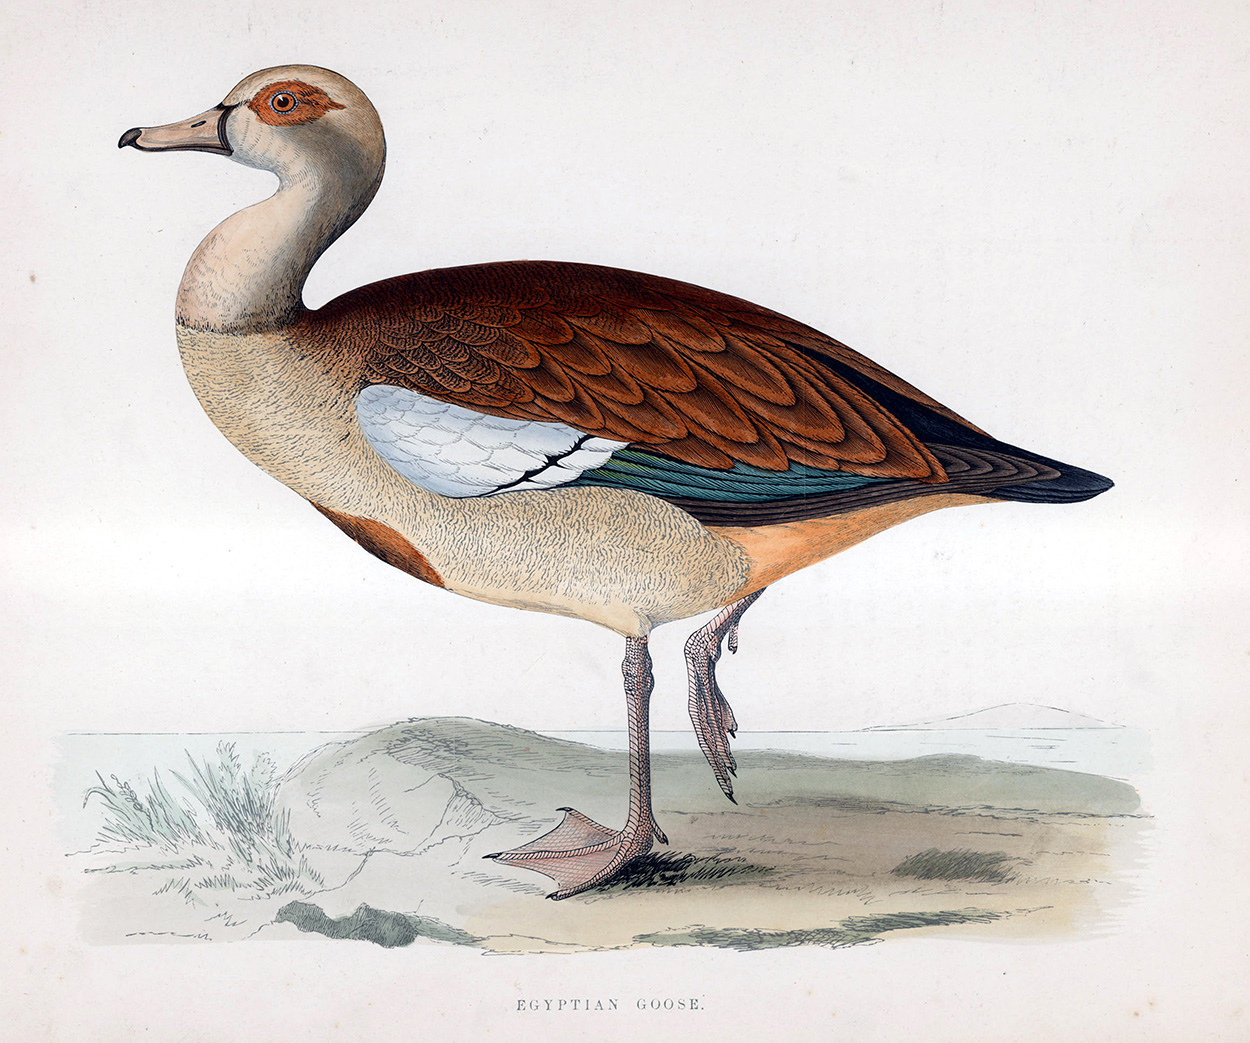 Egyptian Goose - hand coloured lithograph 1891 (Print) art by Beverley R Morris Art at The Illustration Art Gallery